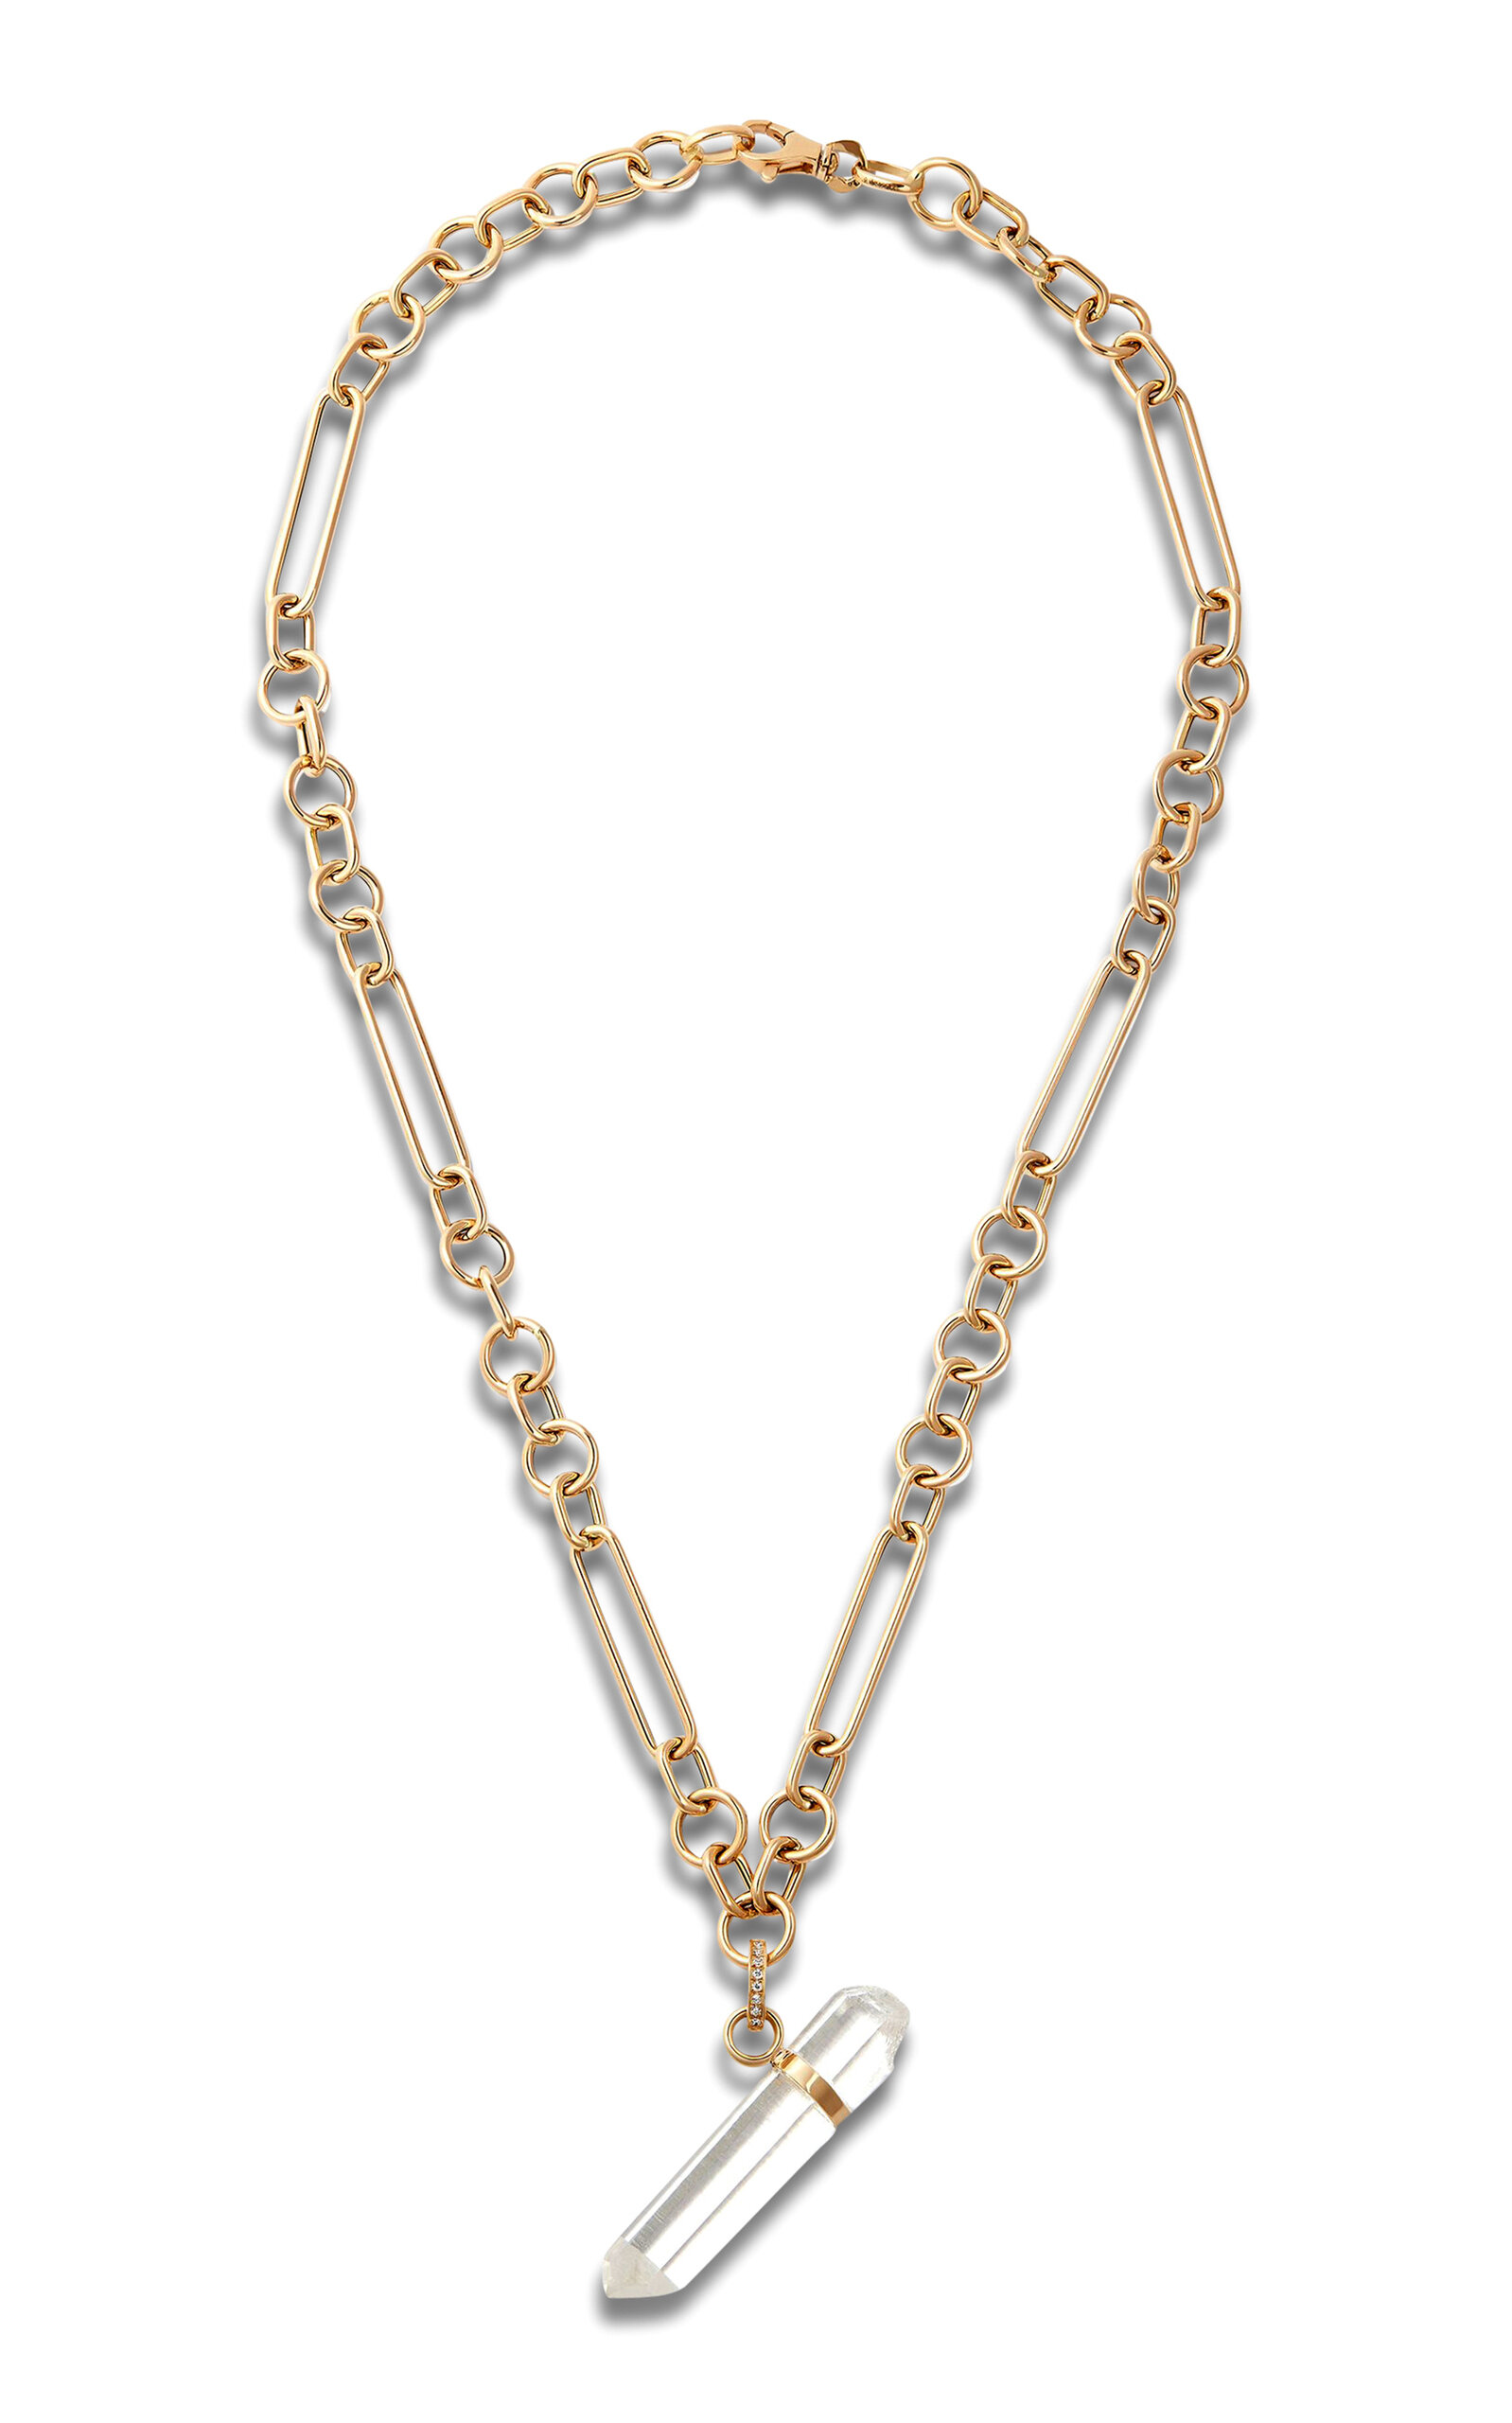 Jia Jia 14k Yellow Gold Diamond And Crystal Quartz Chain Necklace